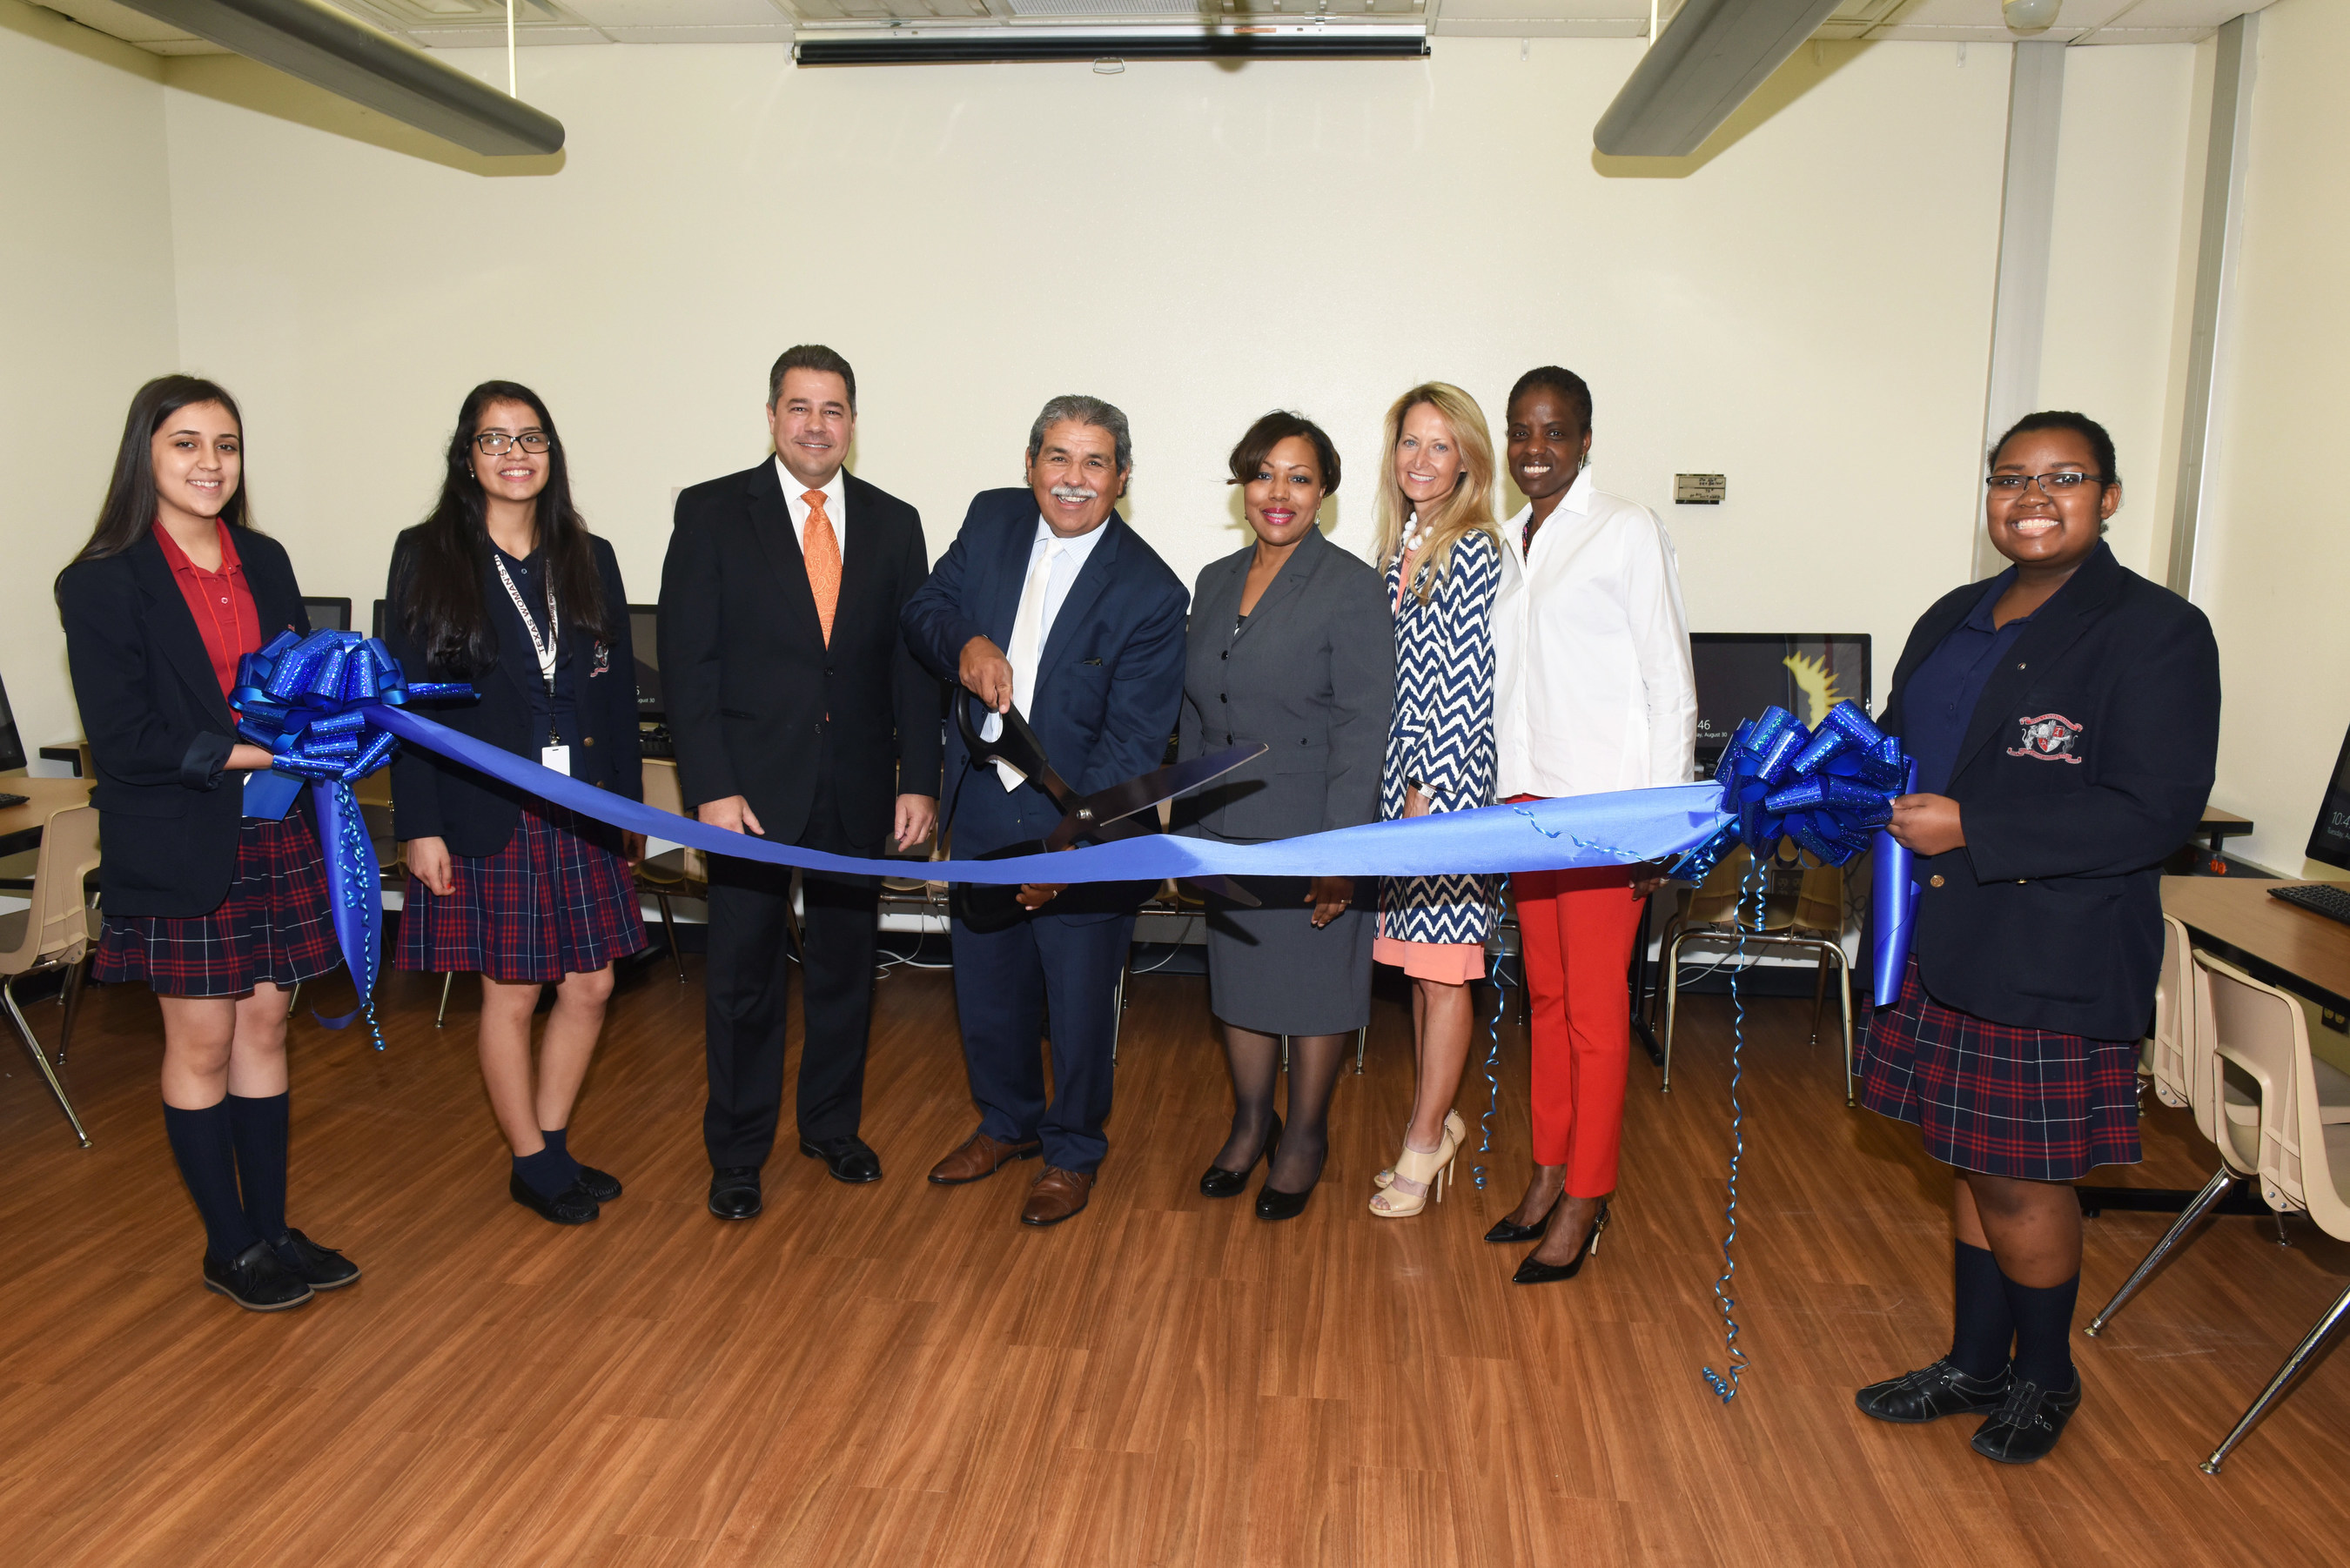 Young Women's Preparatory Network held a ribbon cutting this morning at its first member school, Irma Rangel, to thank NEC Foundation of America for its generous donation of the new computer lab and equipment. Pictured are Irma Rangel students along with Juan Fontanes, NEC Chief Information Officer (3rd from left); Dr. Michael Hinojosa, Dallas ISD Superintendent; Lisa Curry, Irma Rangel principal; Lynn McBee, Young Women's Preparatory Network CEO; Bernadette Nutall, Dallas ISD board trustee.